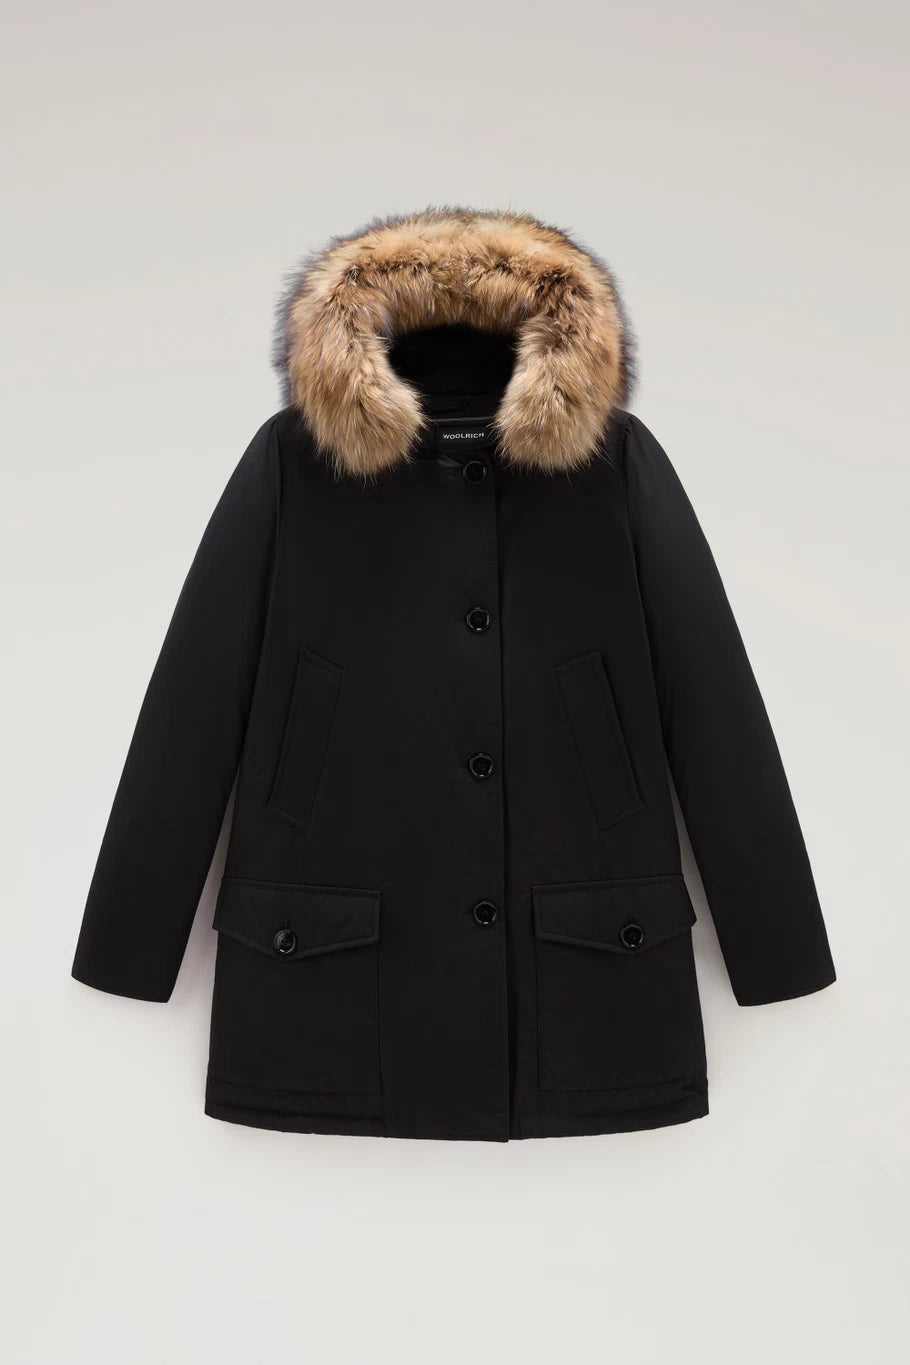 Black Arctic Parka in Ramar Cloth with Four Pockets and Detachable Fur